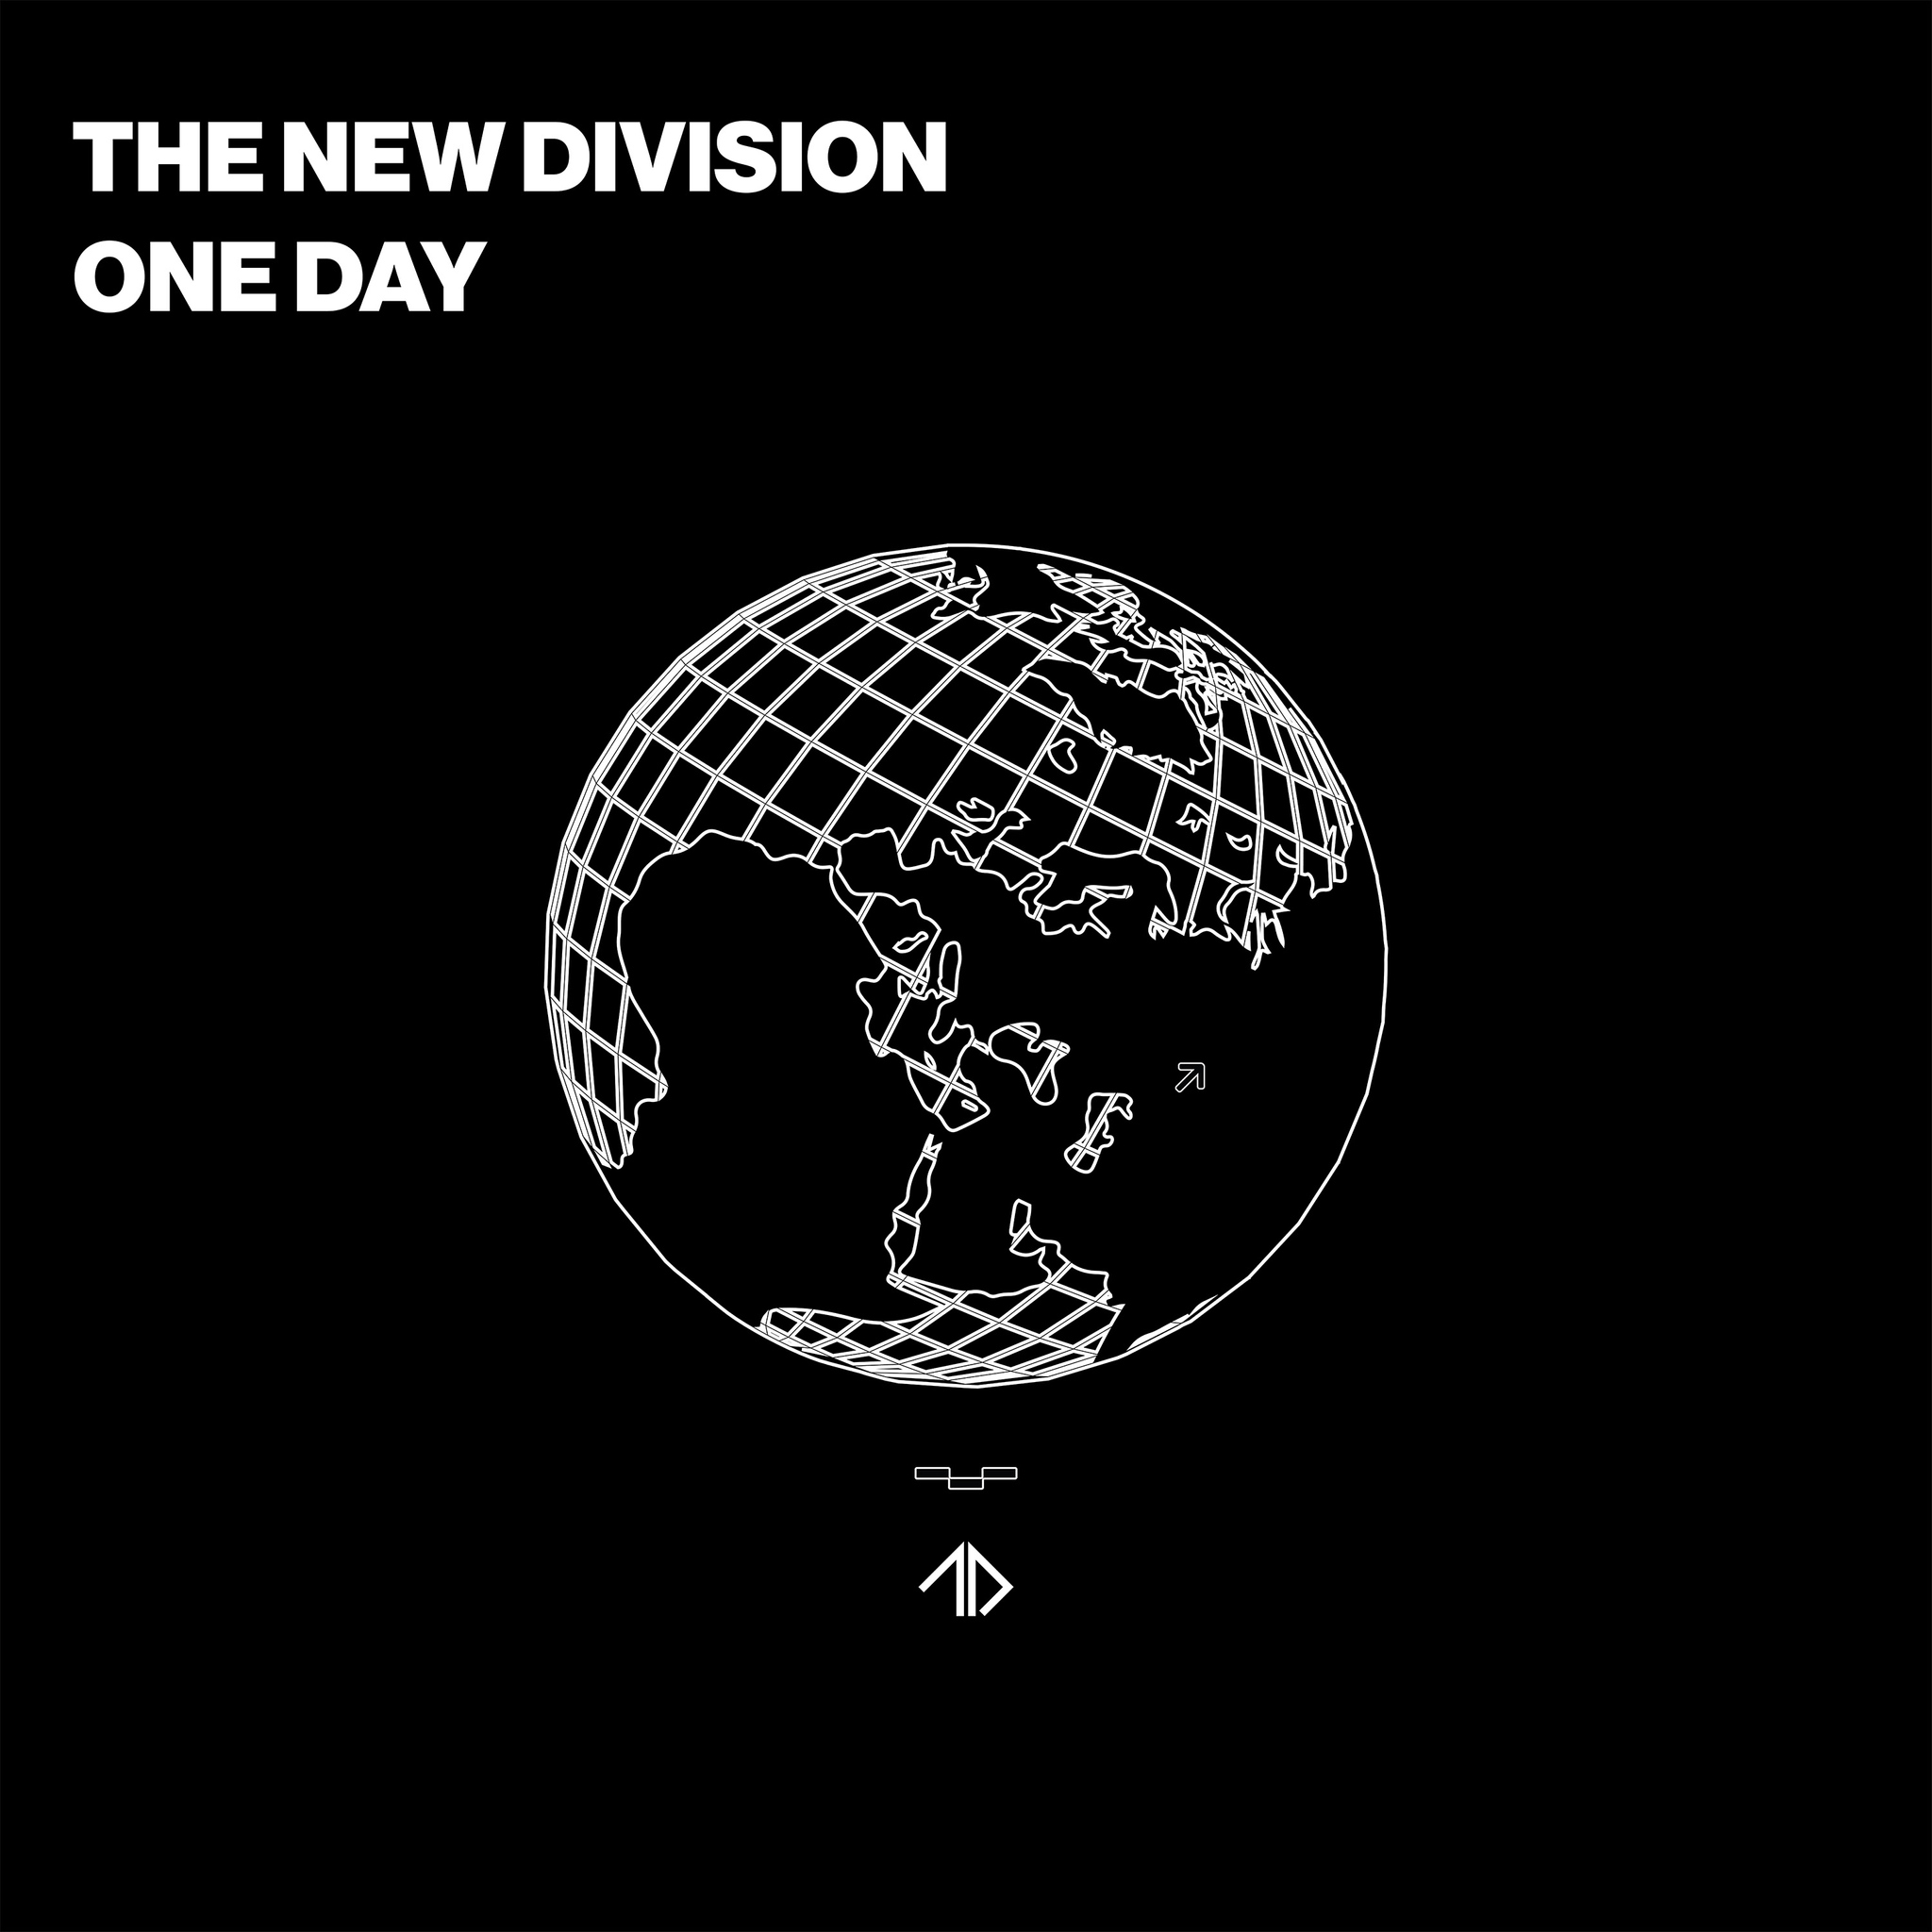 The New Division “One Day” single artwork